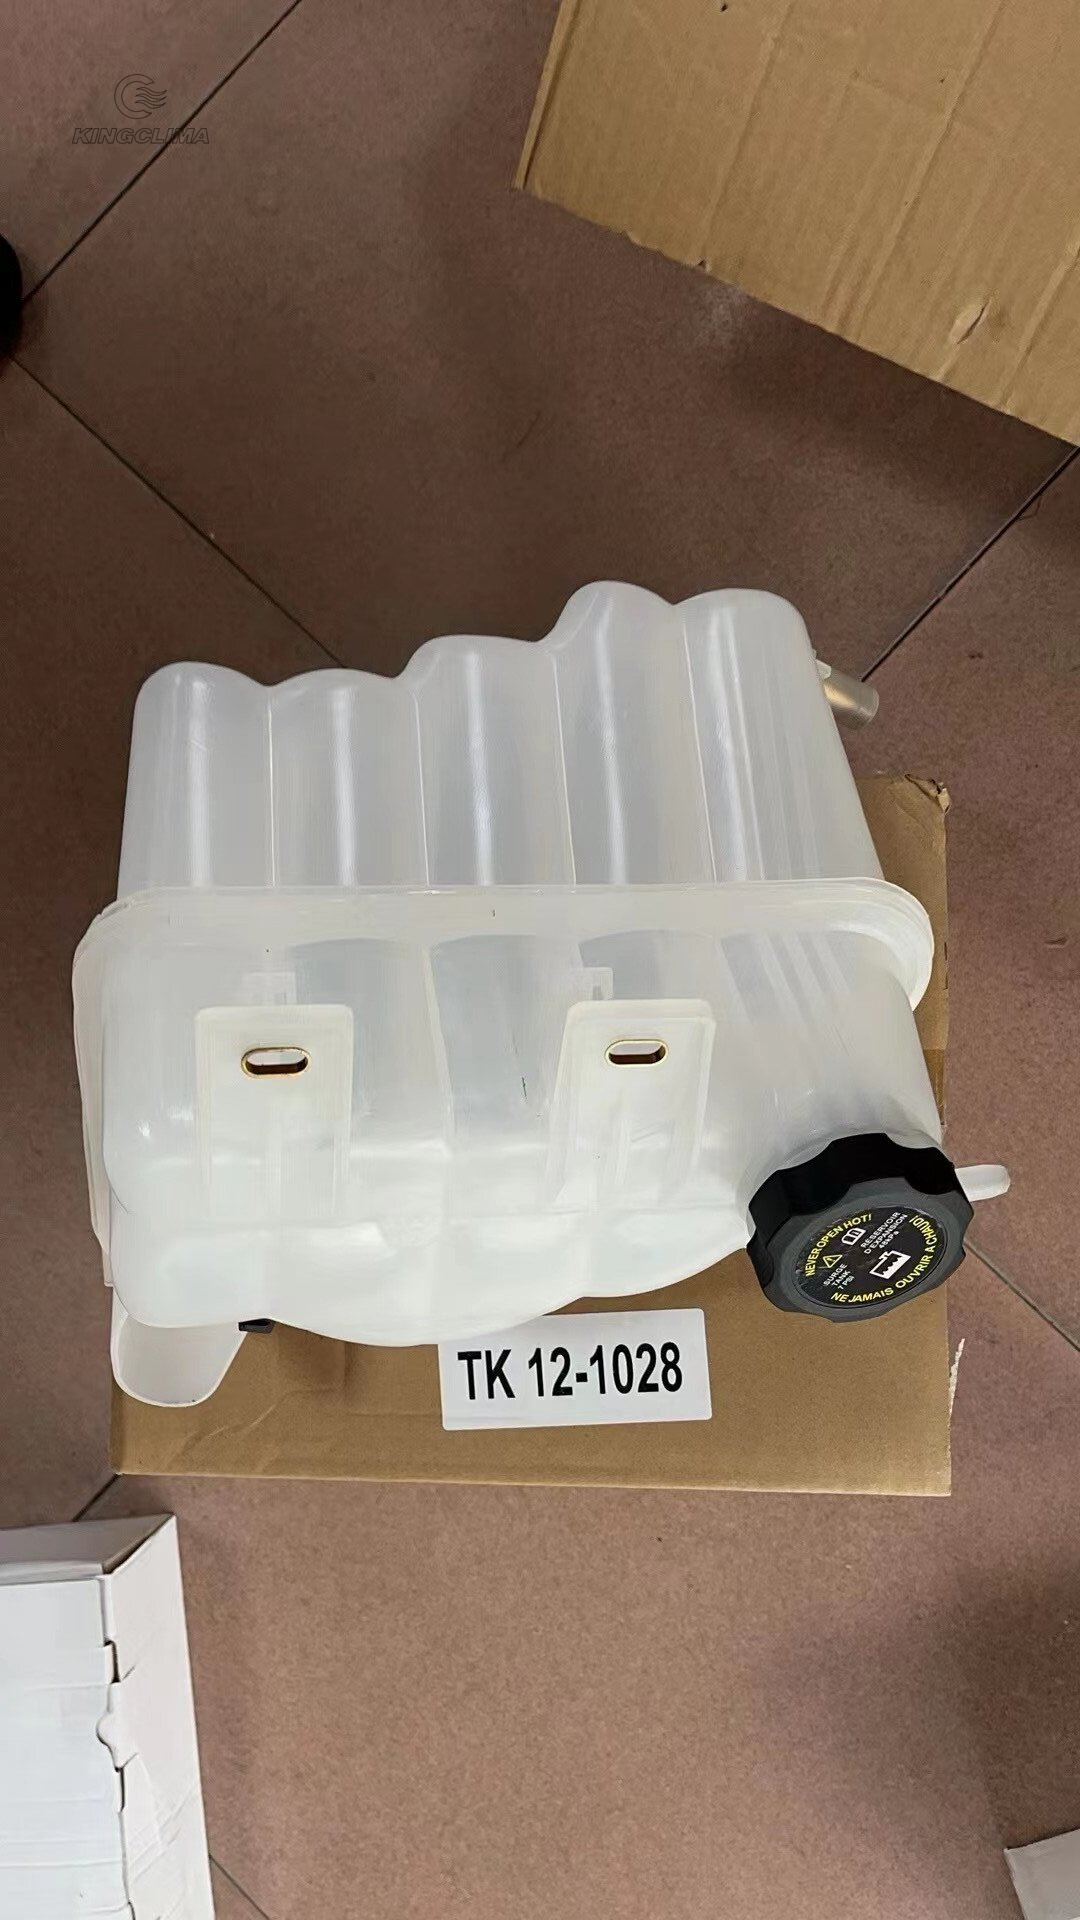 Expansion tank thermo king 12-1028 parts for refrigeration units .